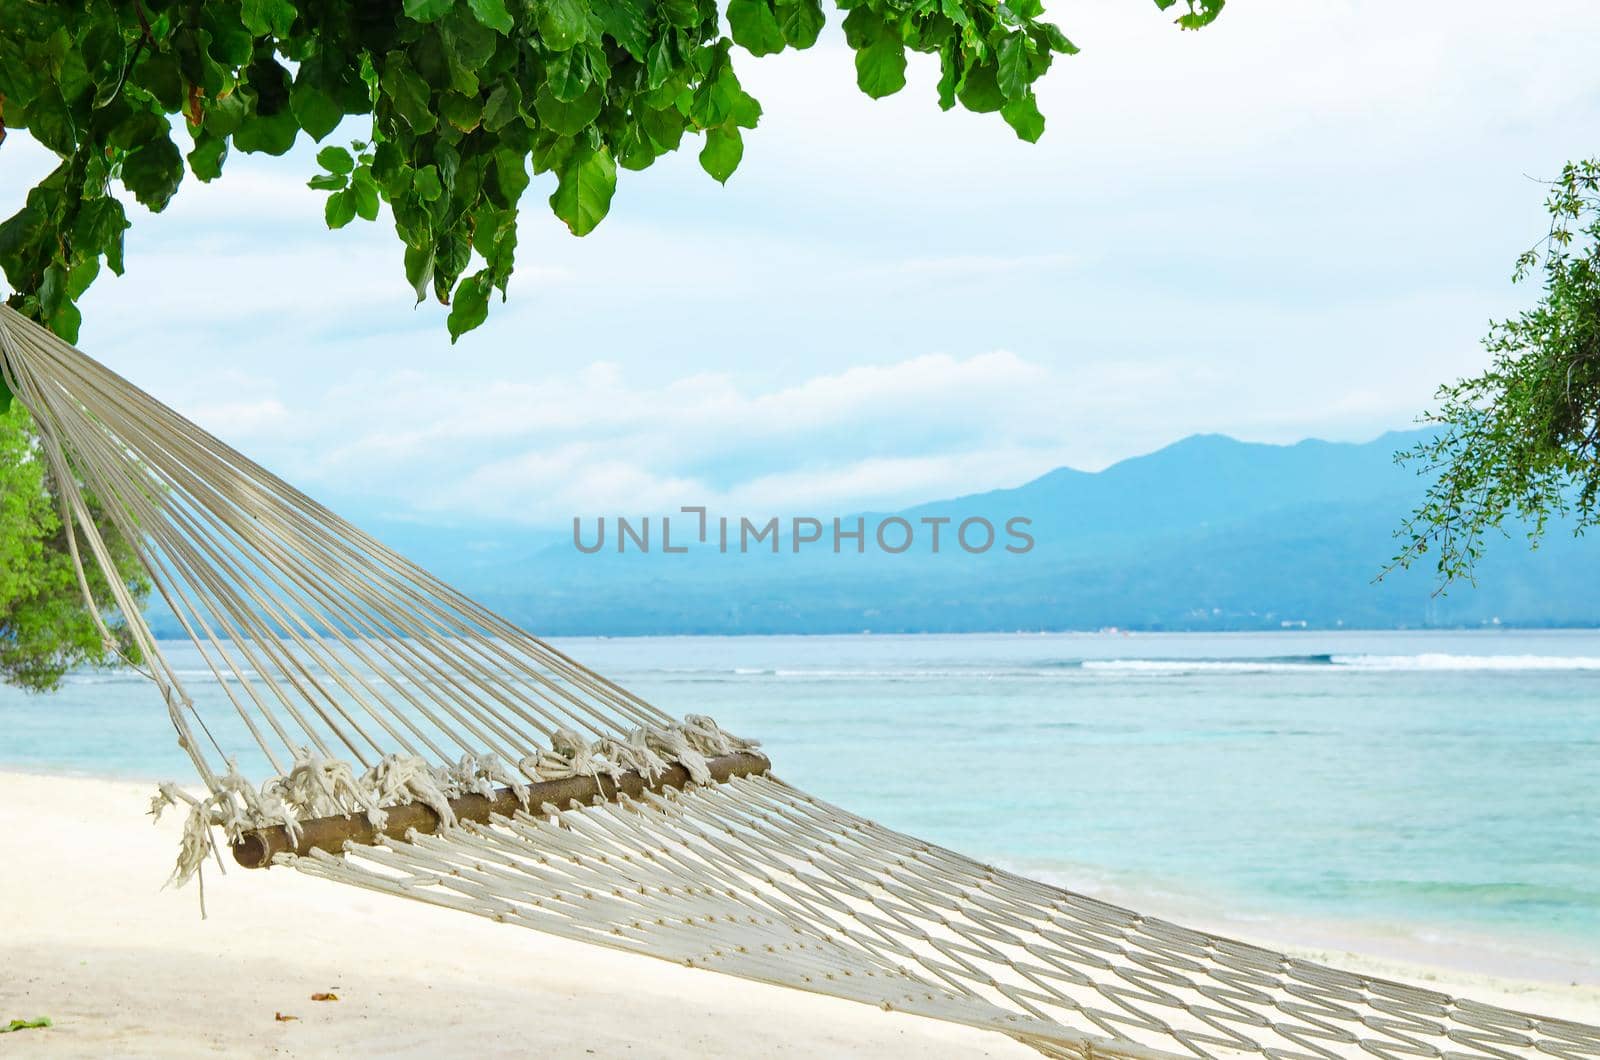 Hammock hanging in the trees on an exotic beach in Bali, Indonesia. Stock image.